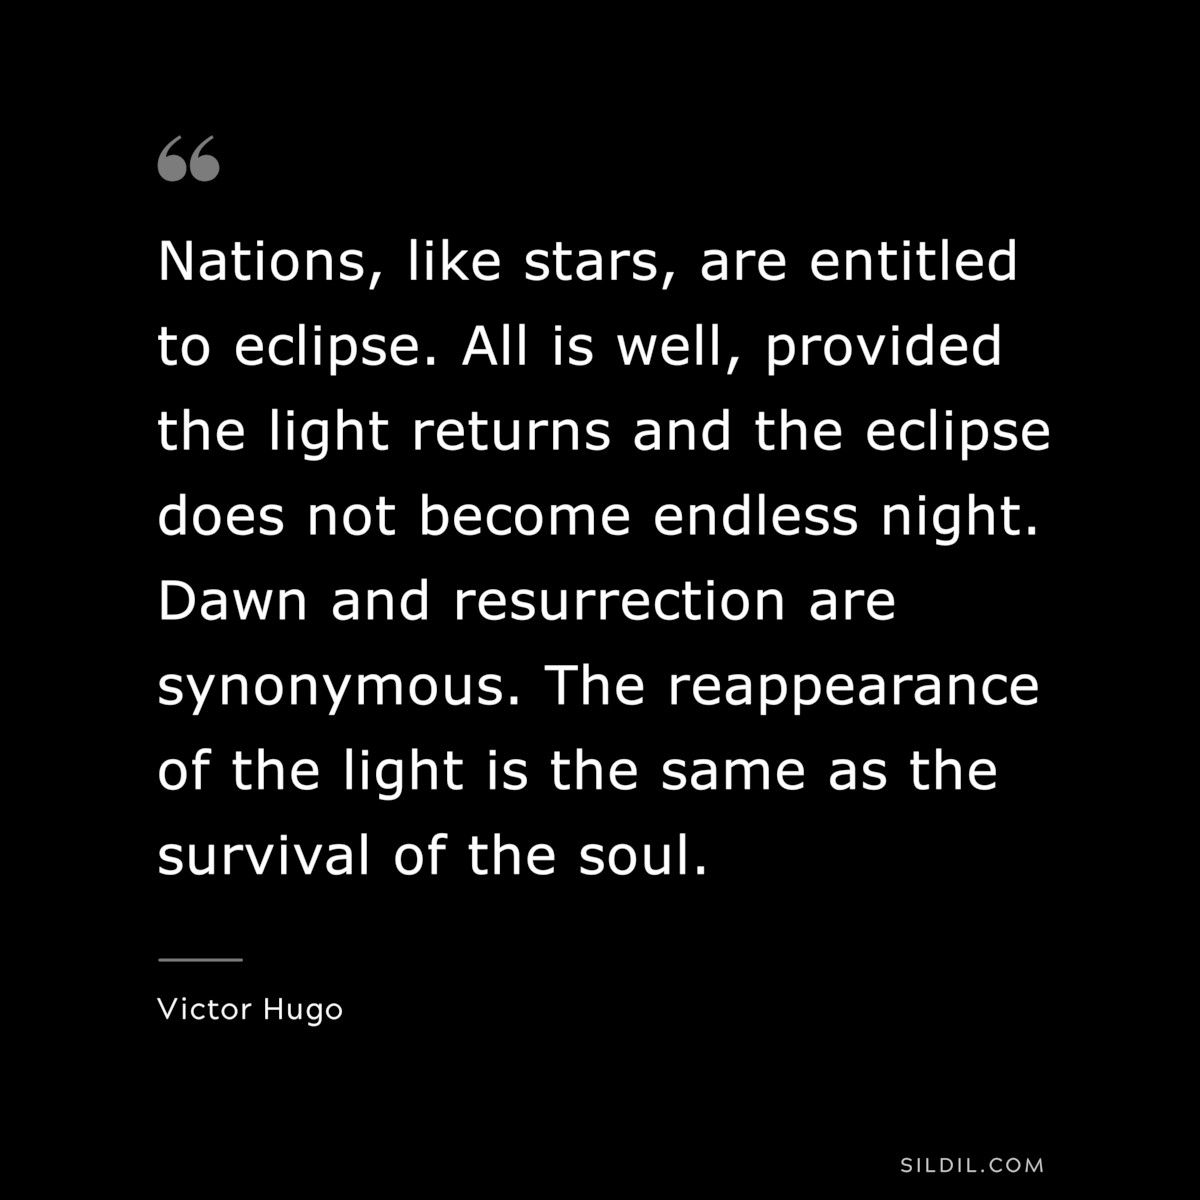 Nations, like stars, are entitled to eclipse. All is well, provided the light returns and the eclipse does not become endless night. Dawn and resurrection are synonymous. The reappearance of the light is the same as the survival of the soul.― Victor Hugo